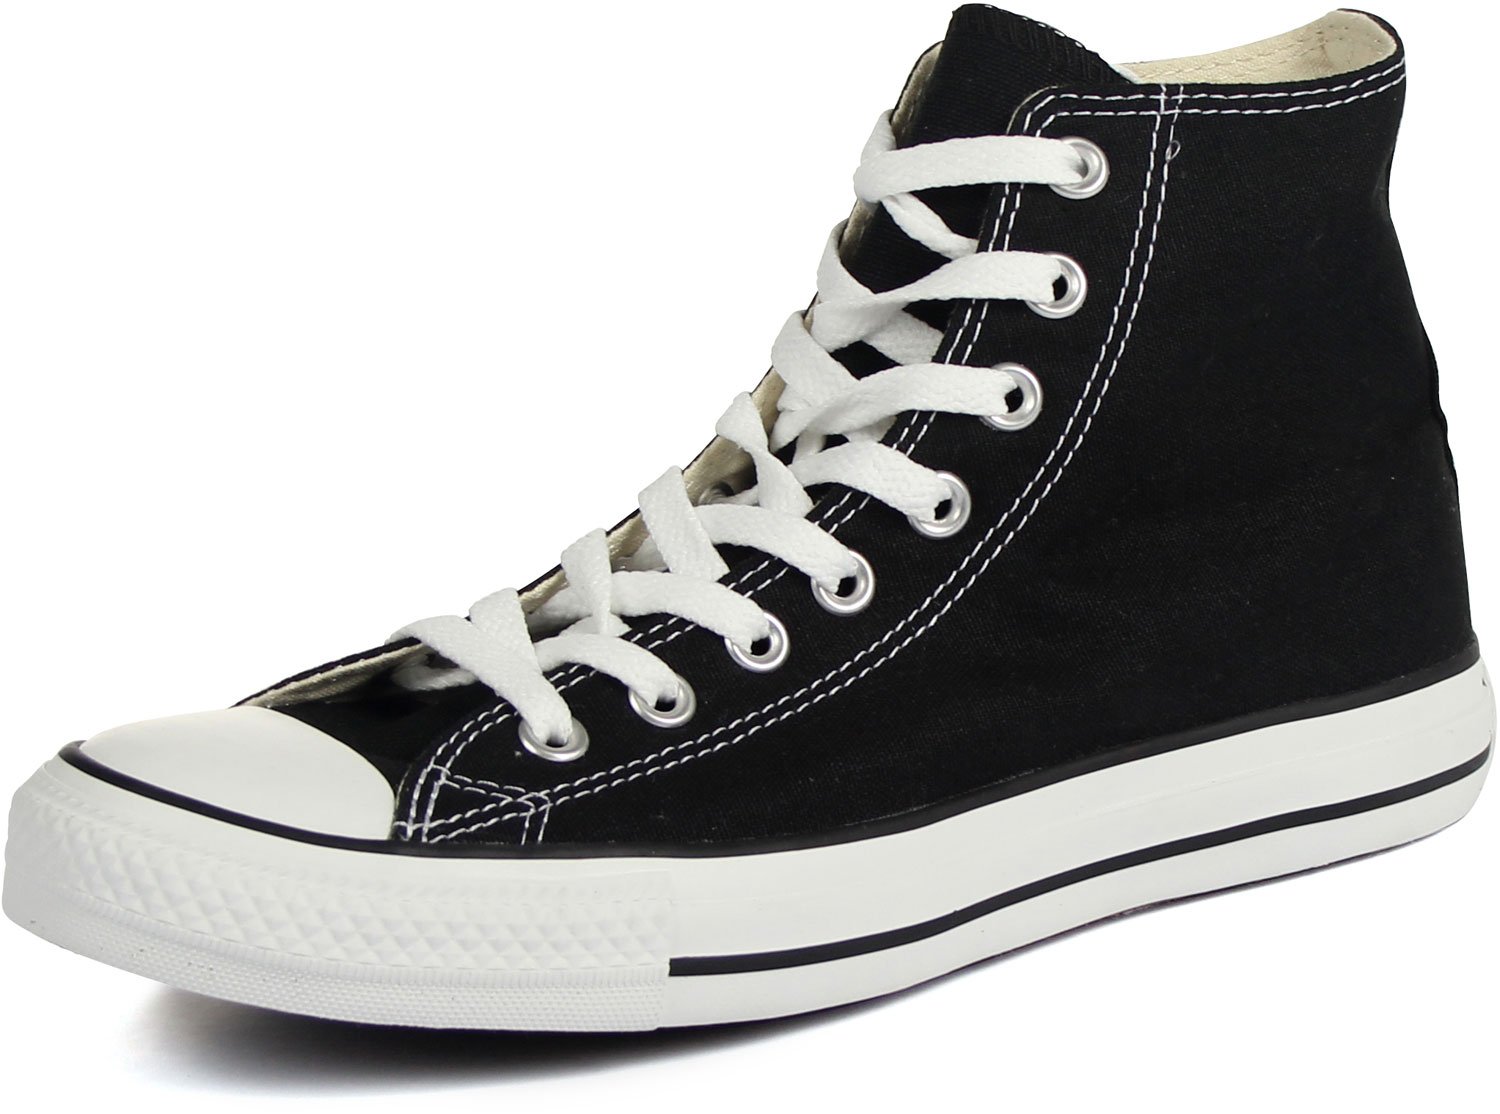 Converse Unisex Chuck Taylor All Star High Top Sneakers (10 D(M) US, Black/White)